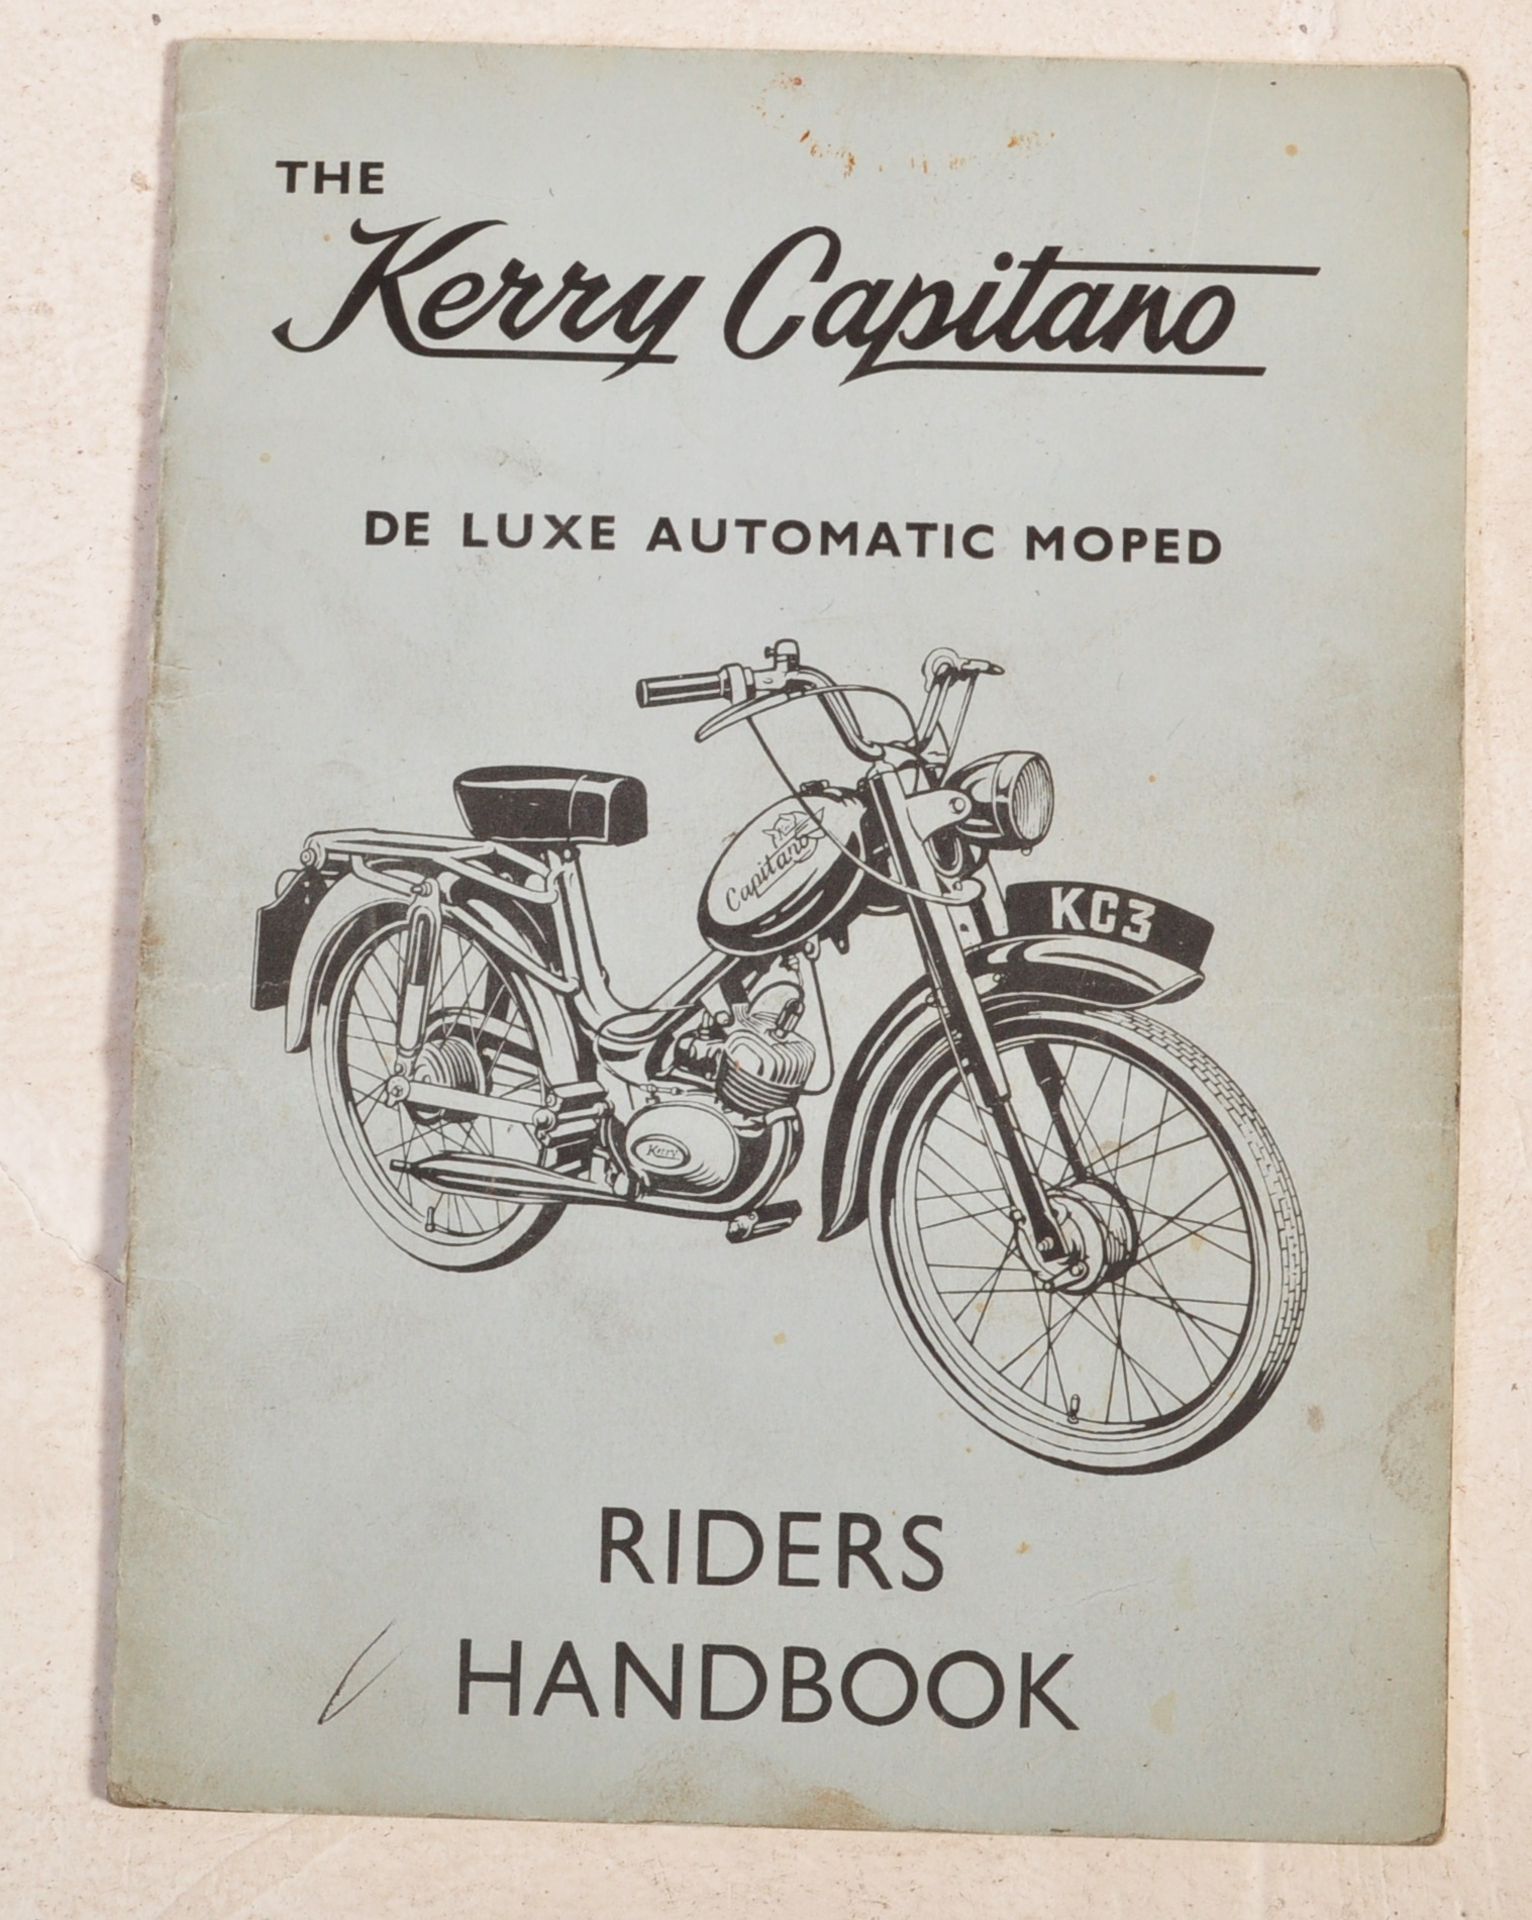 1965 49CC KERRY CAPITANO DELUXE AUTOMATIC MOTORCYCLE - Image 20 of 21